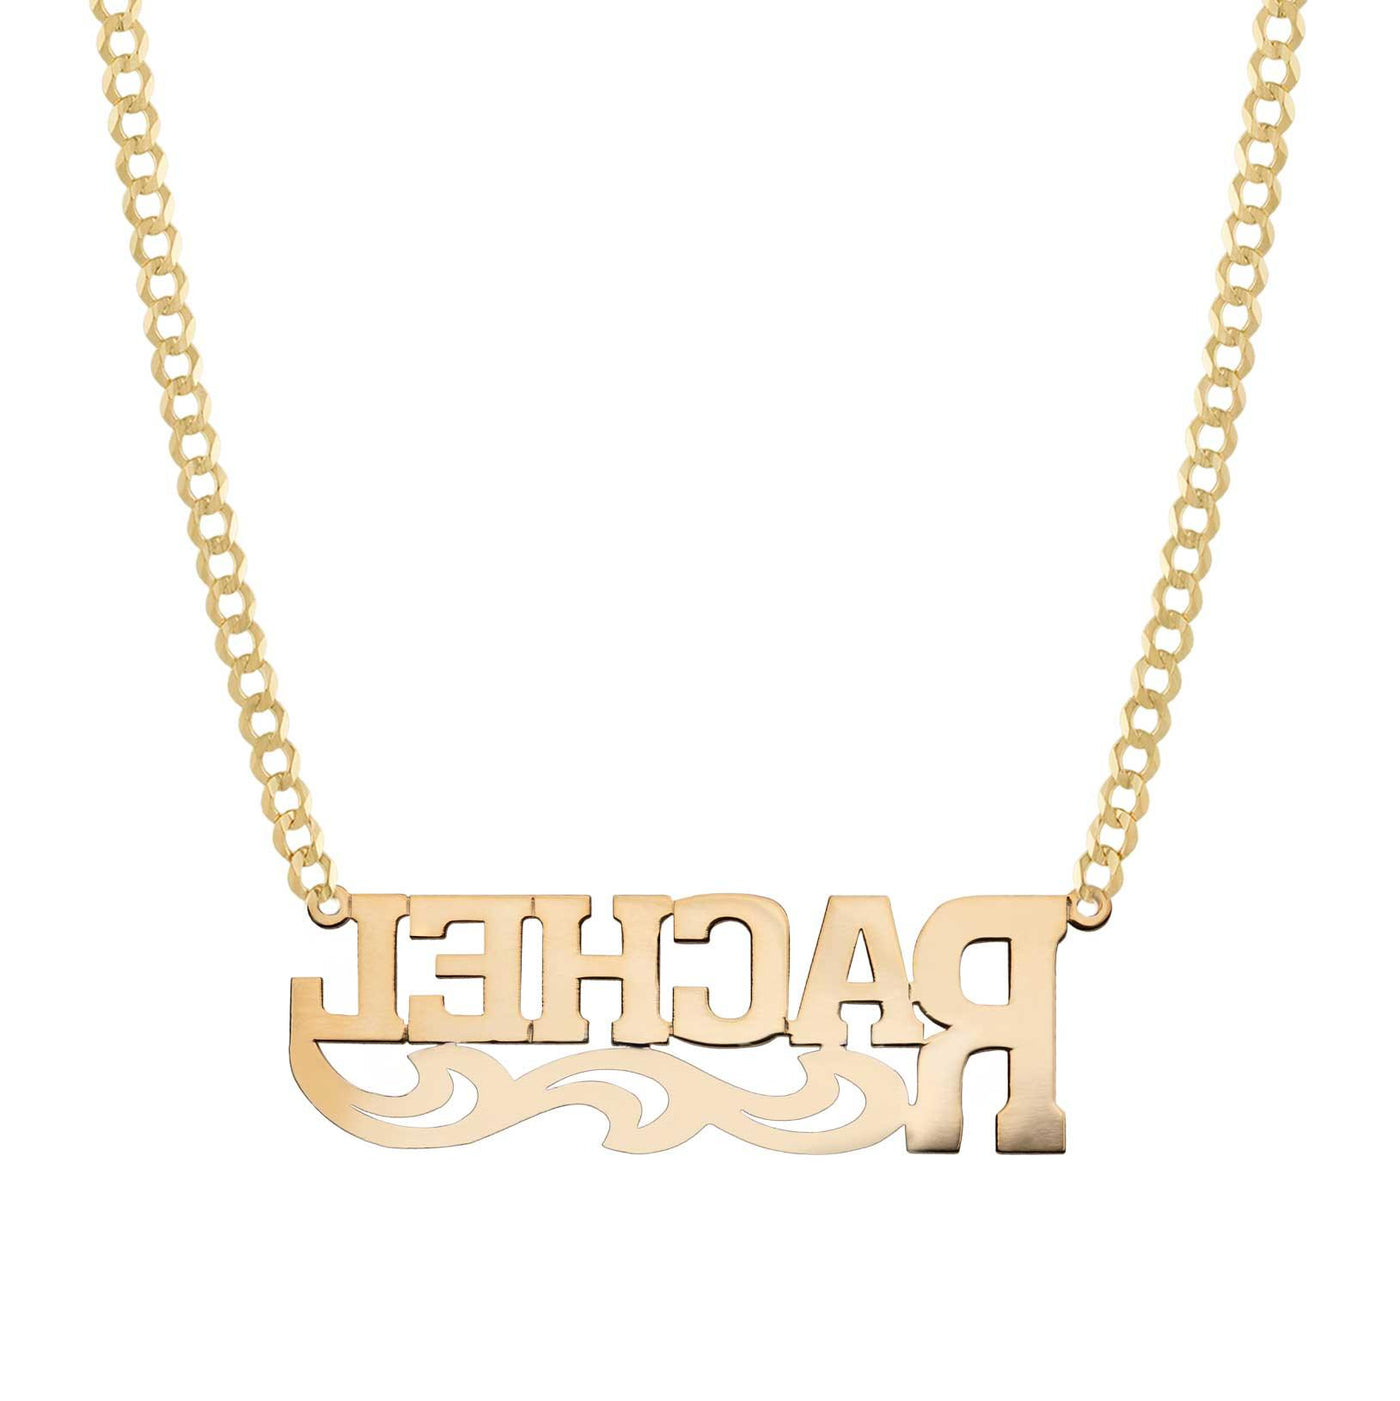 Ladies Ribbon Design Name Plate Necklace 14K Gold - Style 143 - bayamjewelry